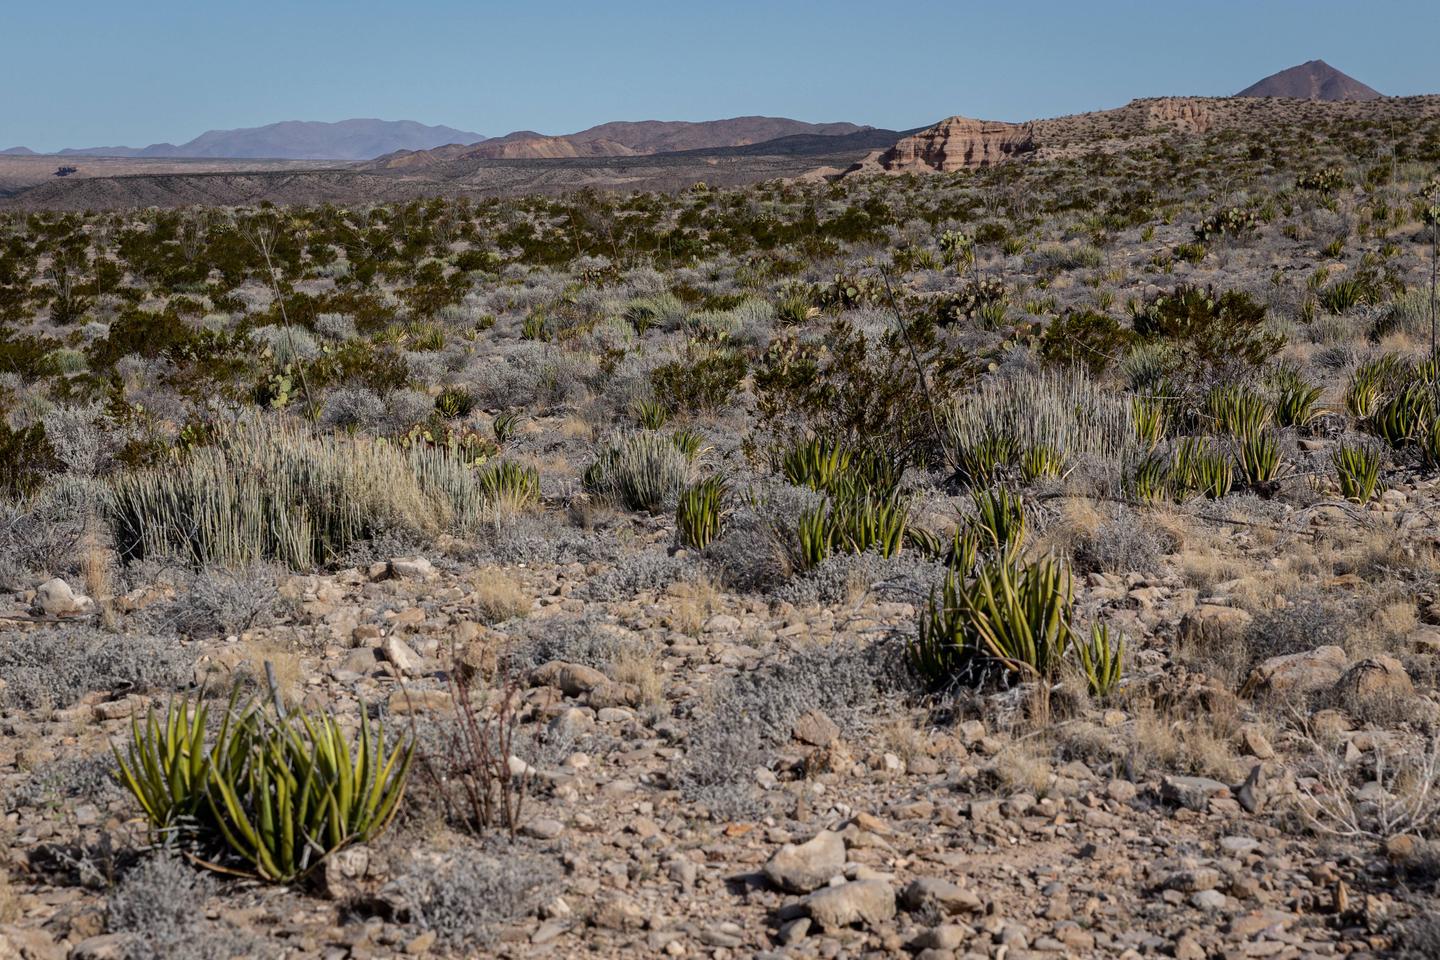 Desert plants with the mountains in the distanceDesert views 